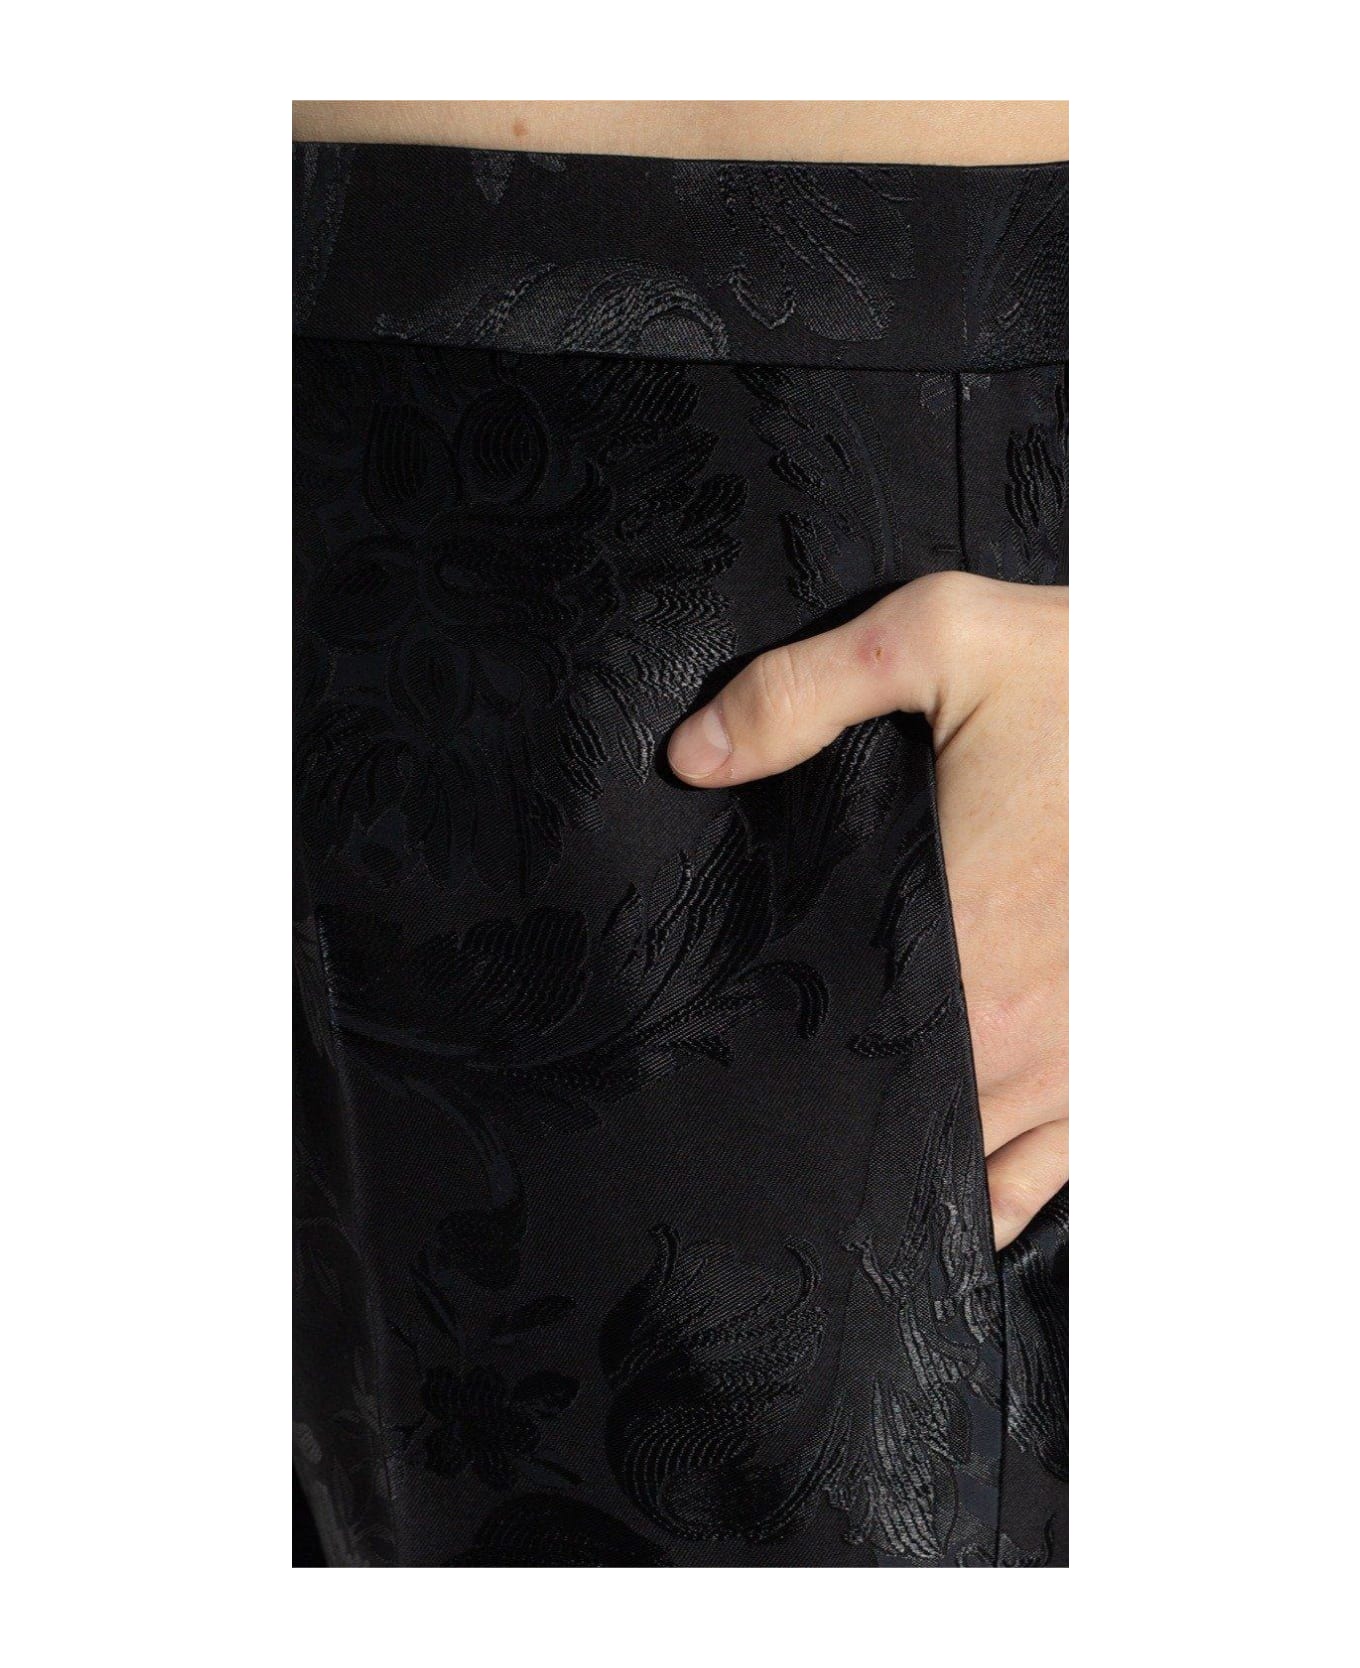 Versace Pleated Tailored Trousers - BLACK